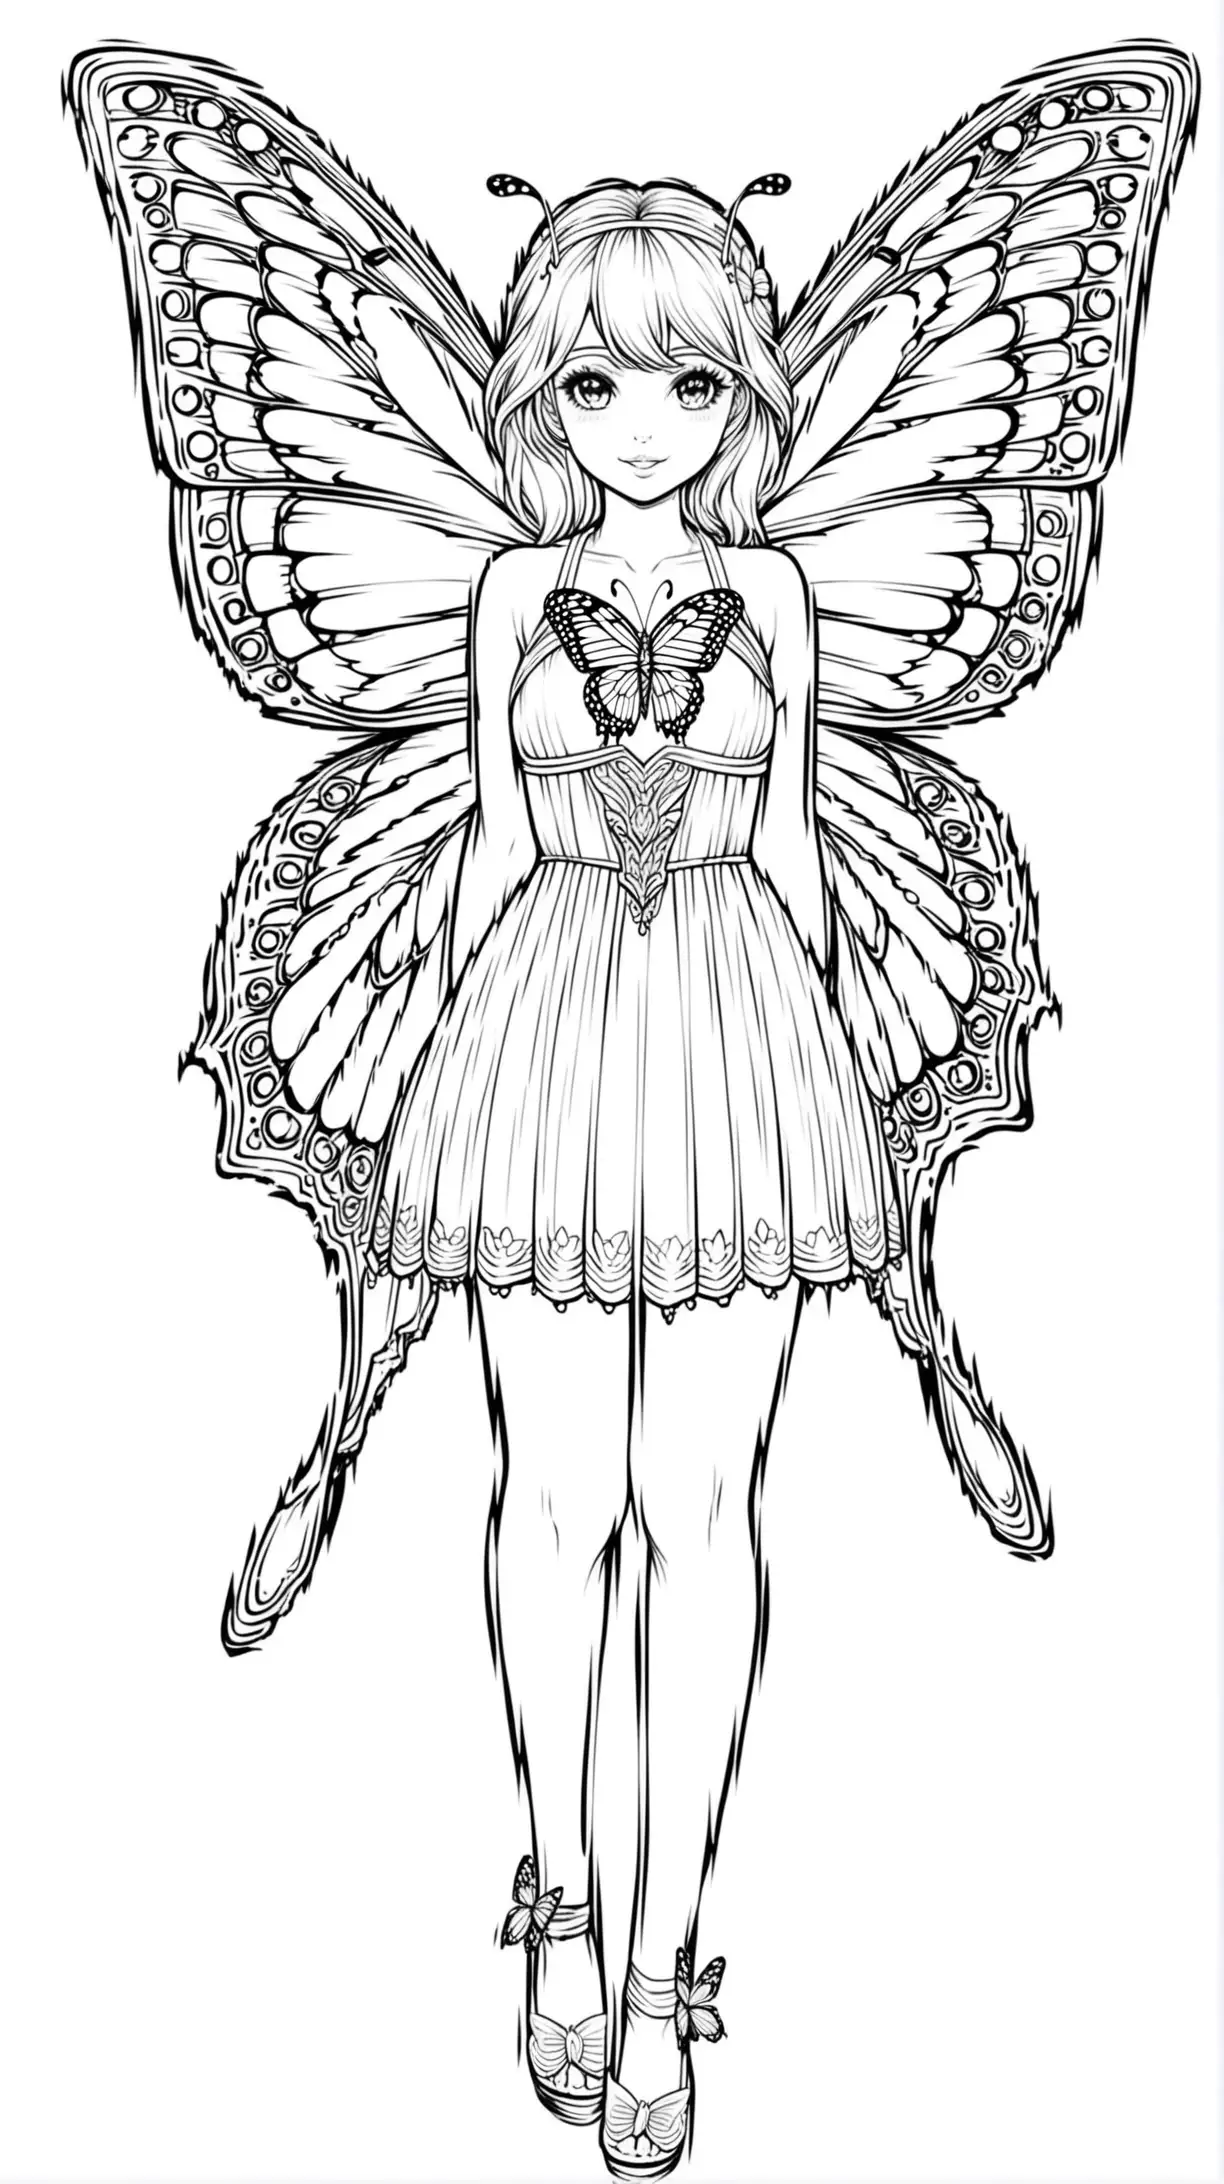 Monochrome Butterfly Coloring Page on Blank Background